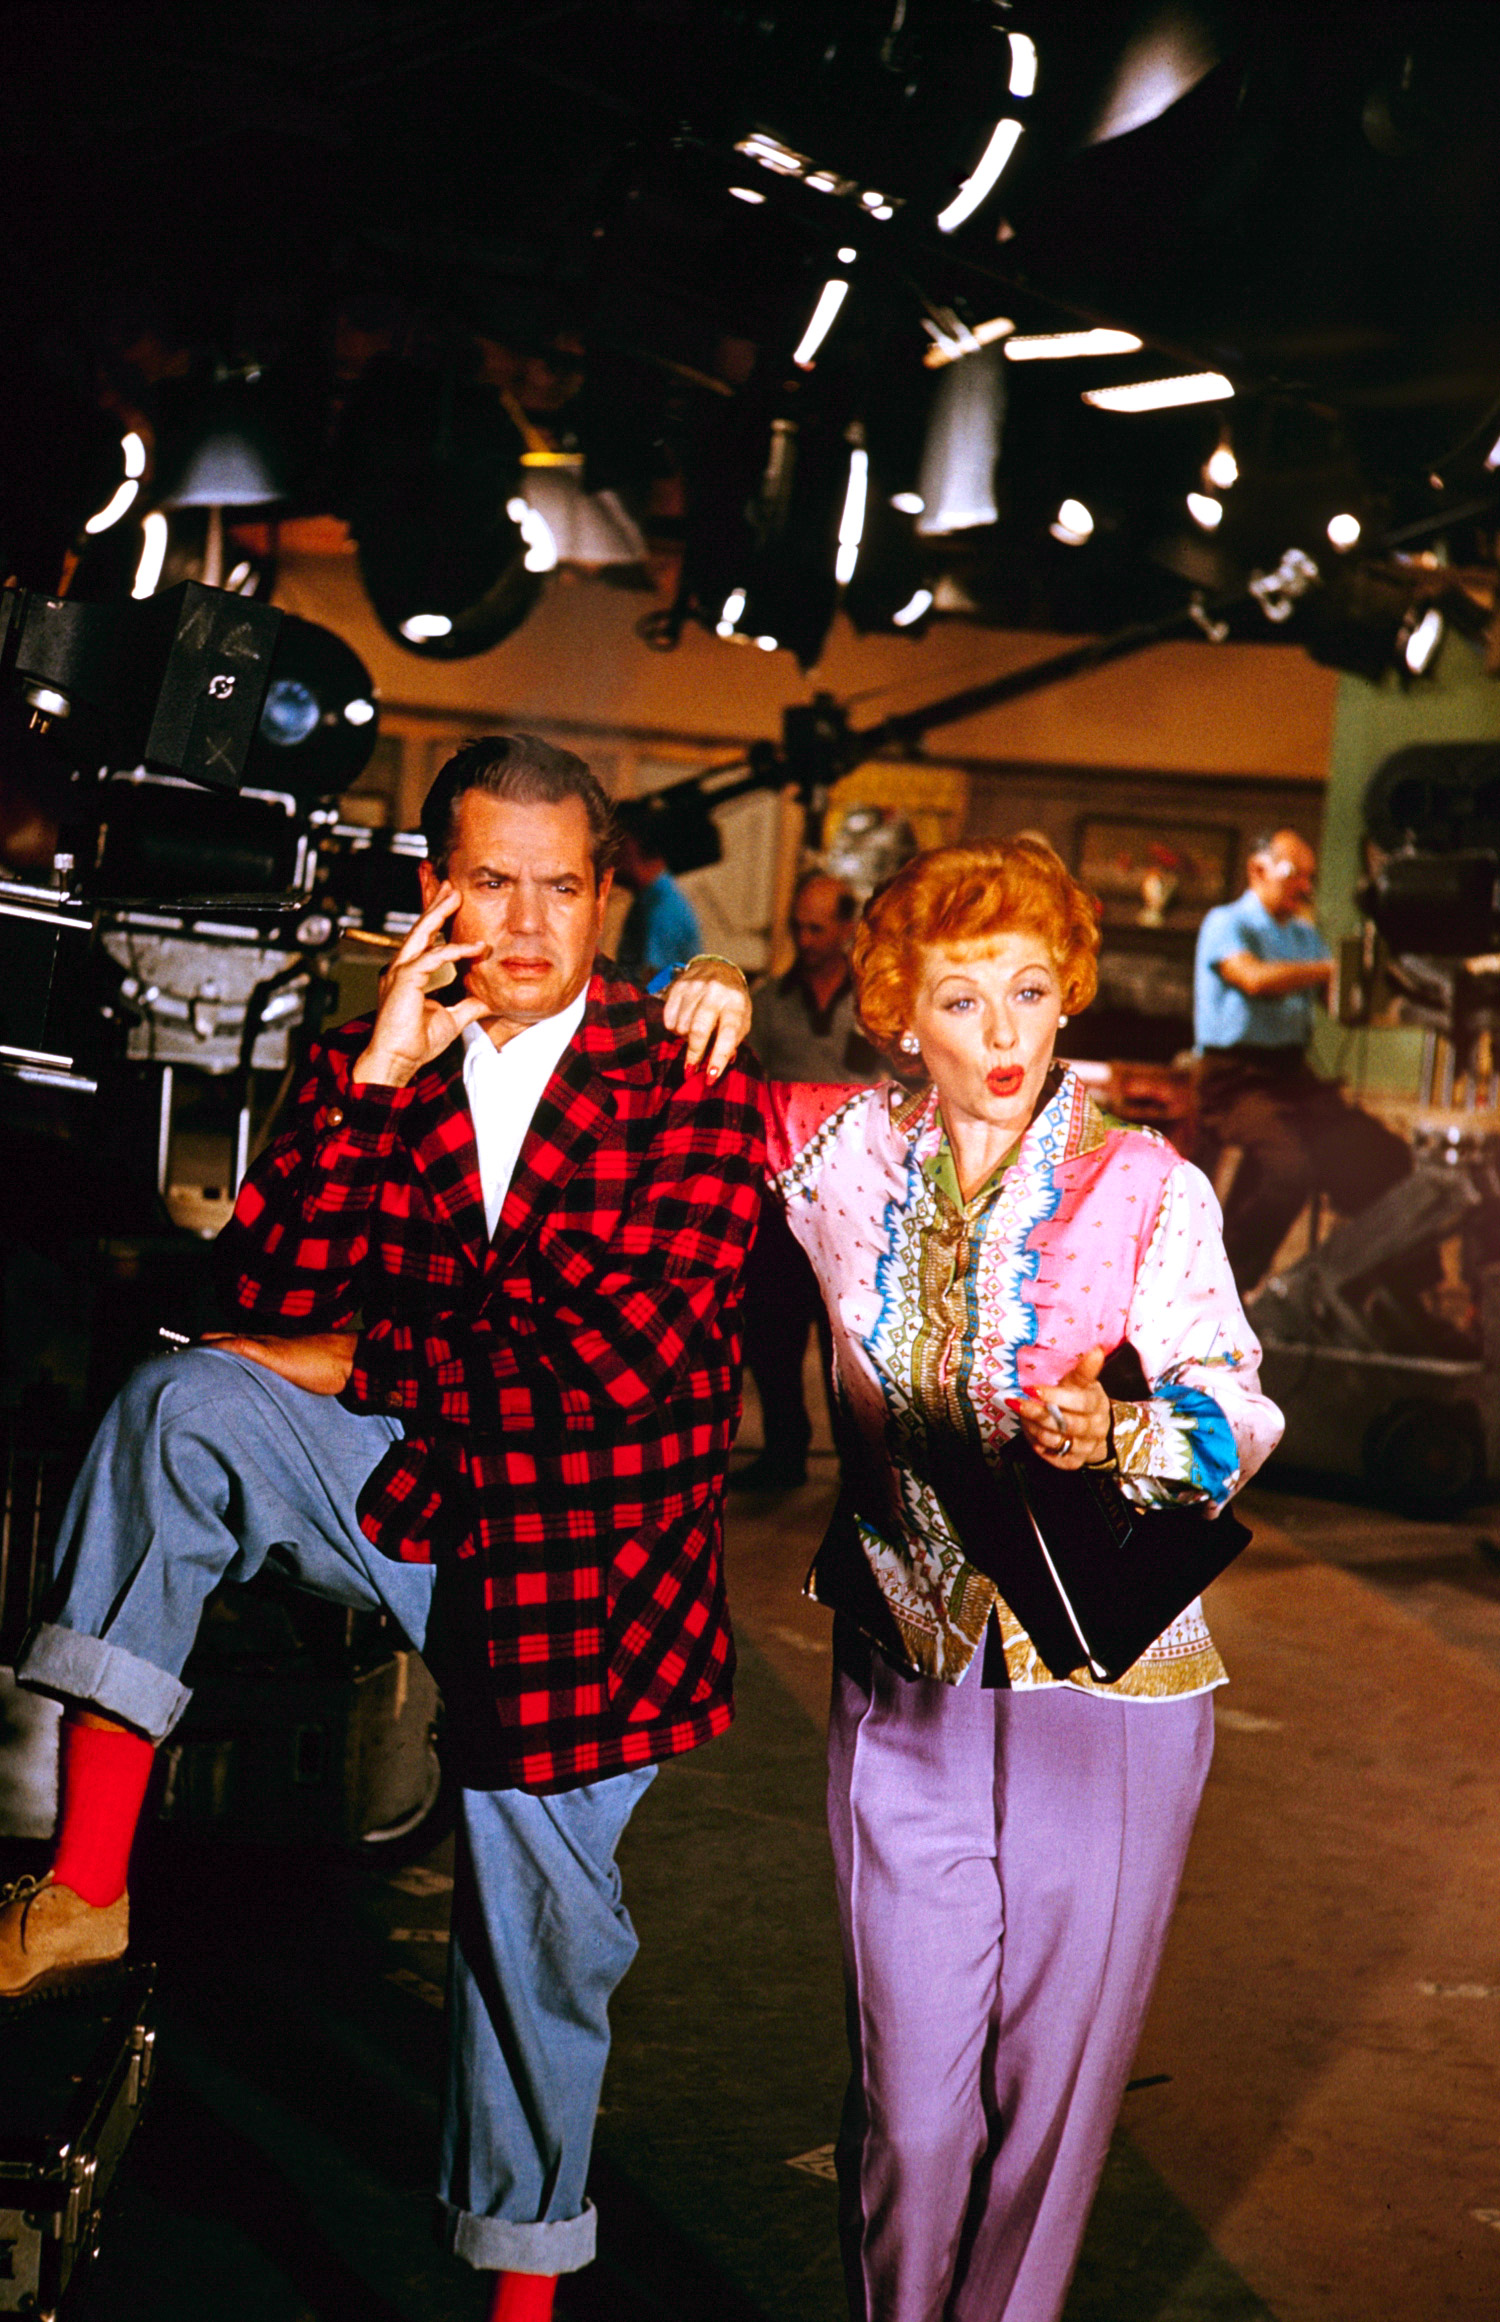 Lucille Ball and Desi Arnaz on the launch of Desilu Studios, pondering their new venture.